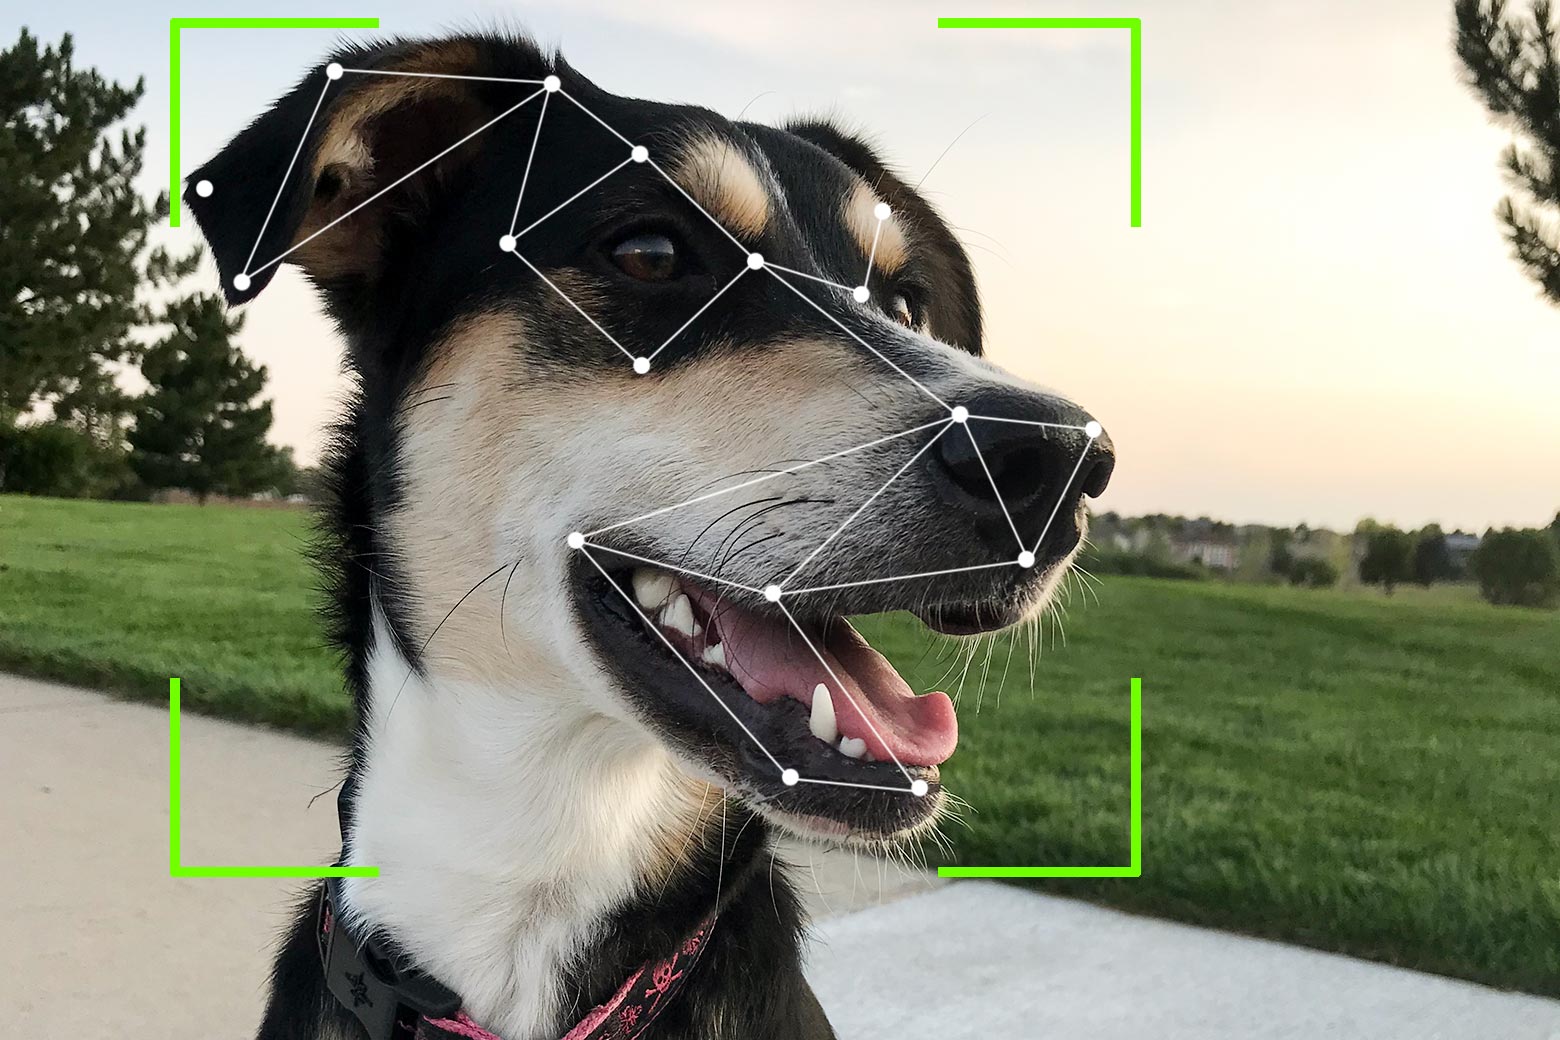 A dog's face mapped by facial recognition technology.